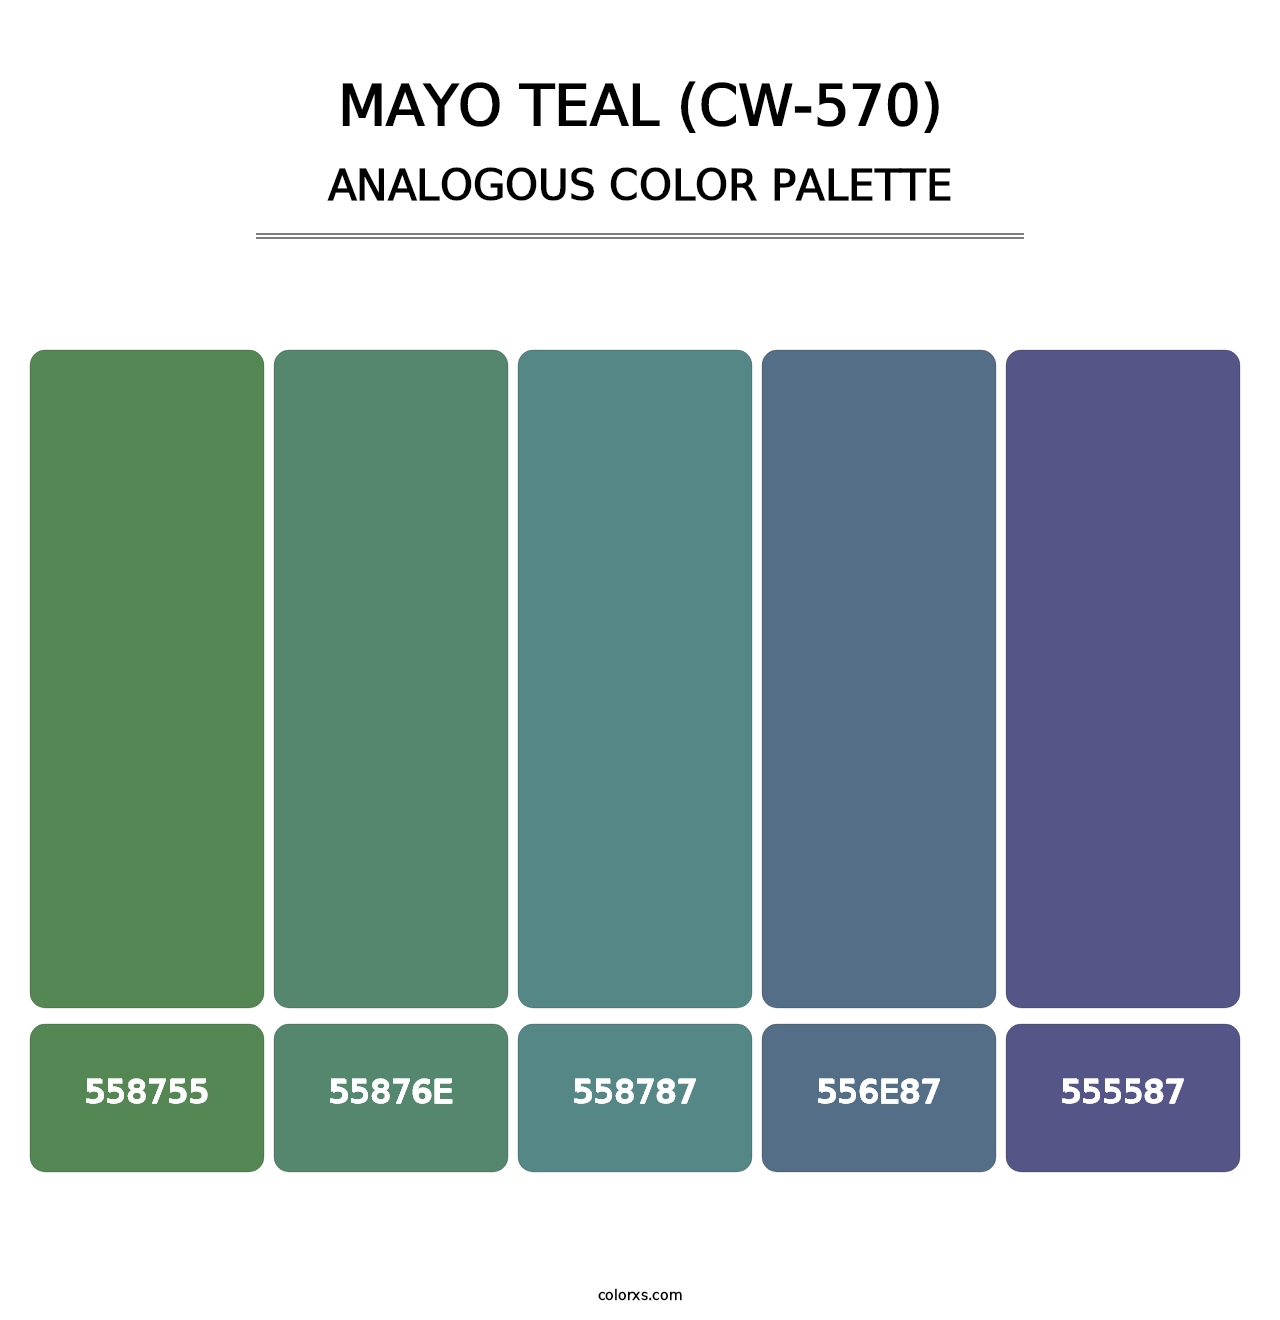 Mayo Teal (CW-570) - Analogous Color Palette